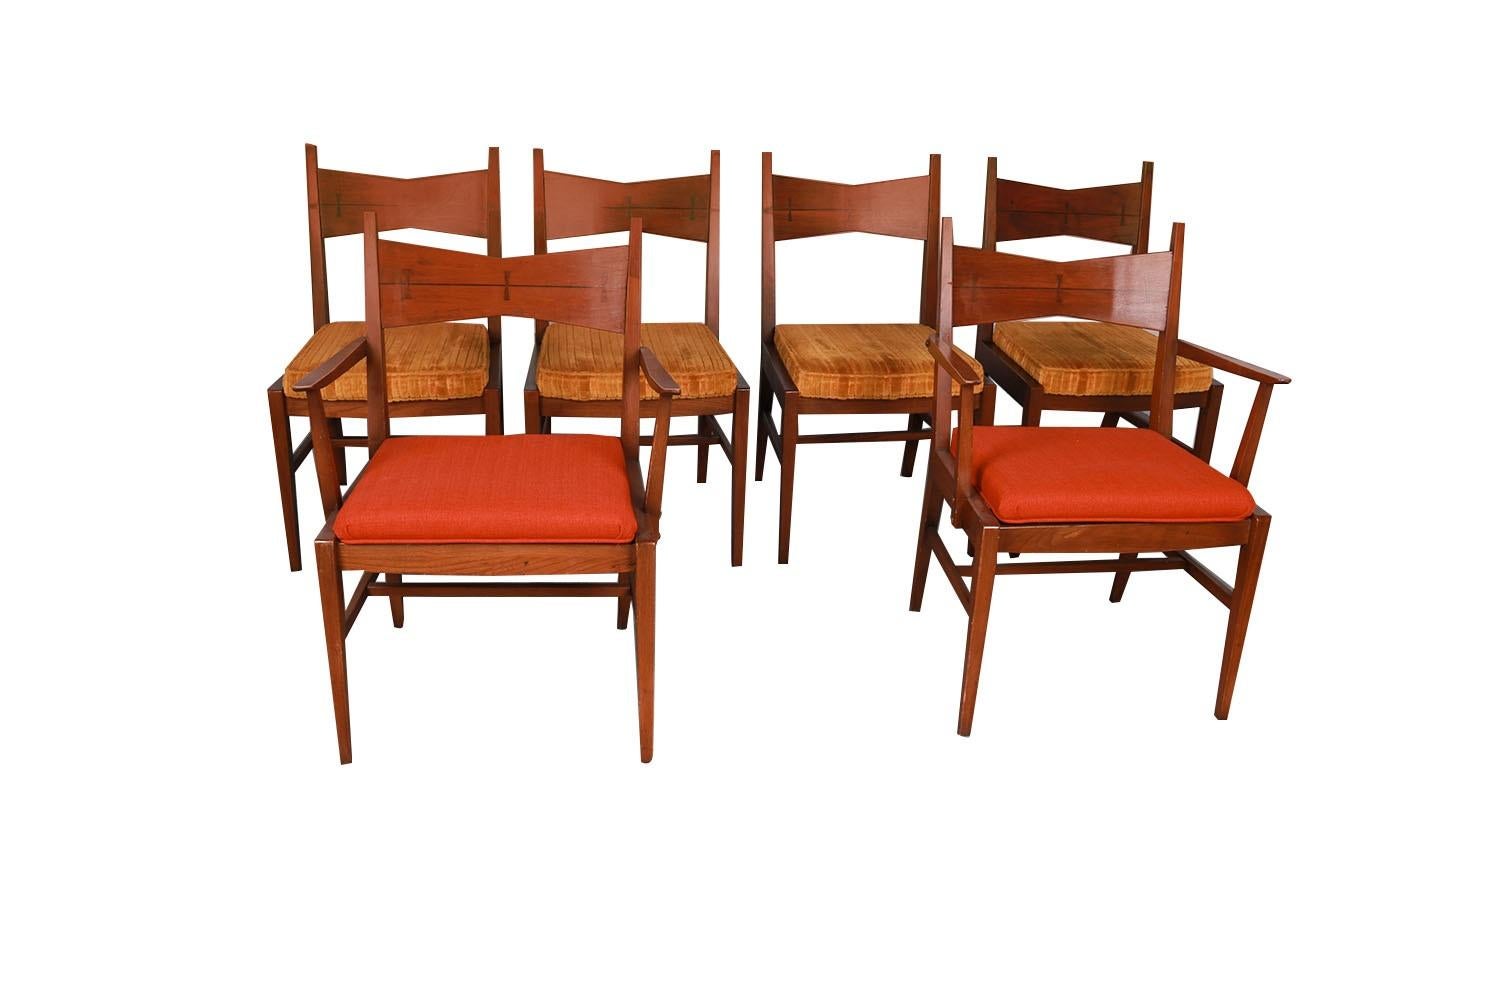 Set of six stunning Mid-Century Modern Walnut Bow Tie Tuxedo dining chairs in great original condition, from Lane Tuxedo line manufactured by Lane, in the style of Paul McCobb. Features two captain armchairs in new upholstery and four side chairs in